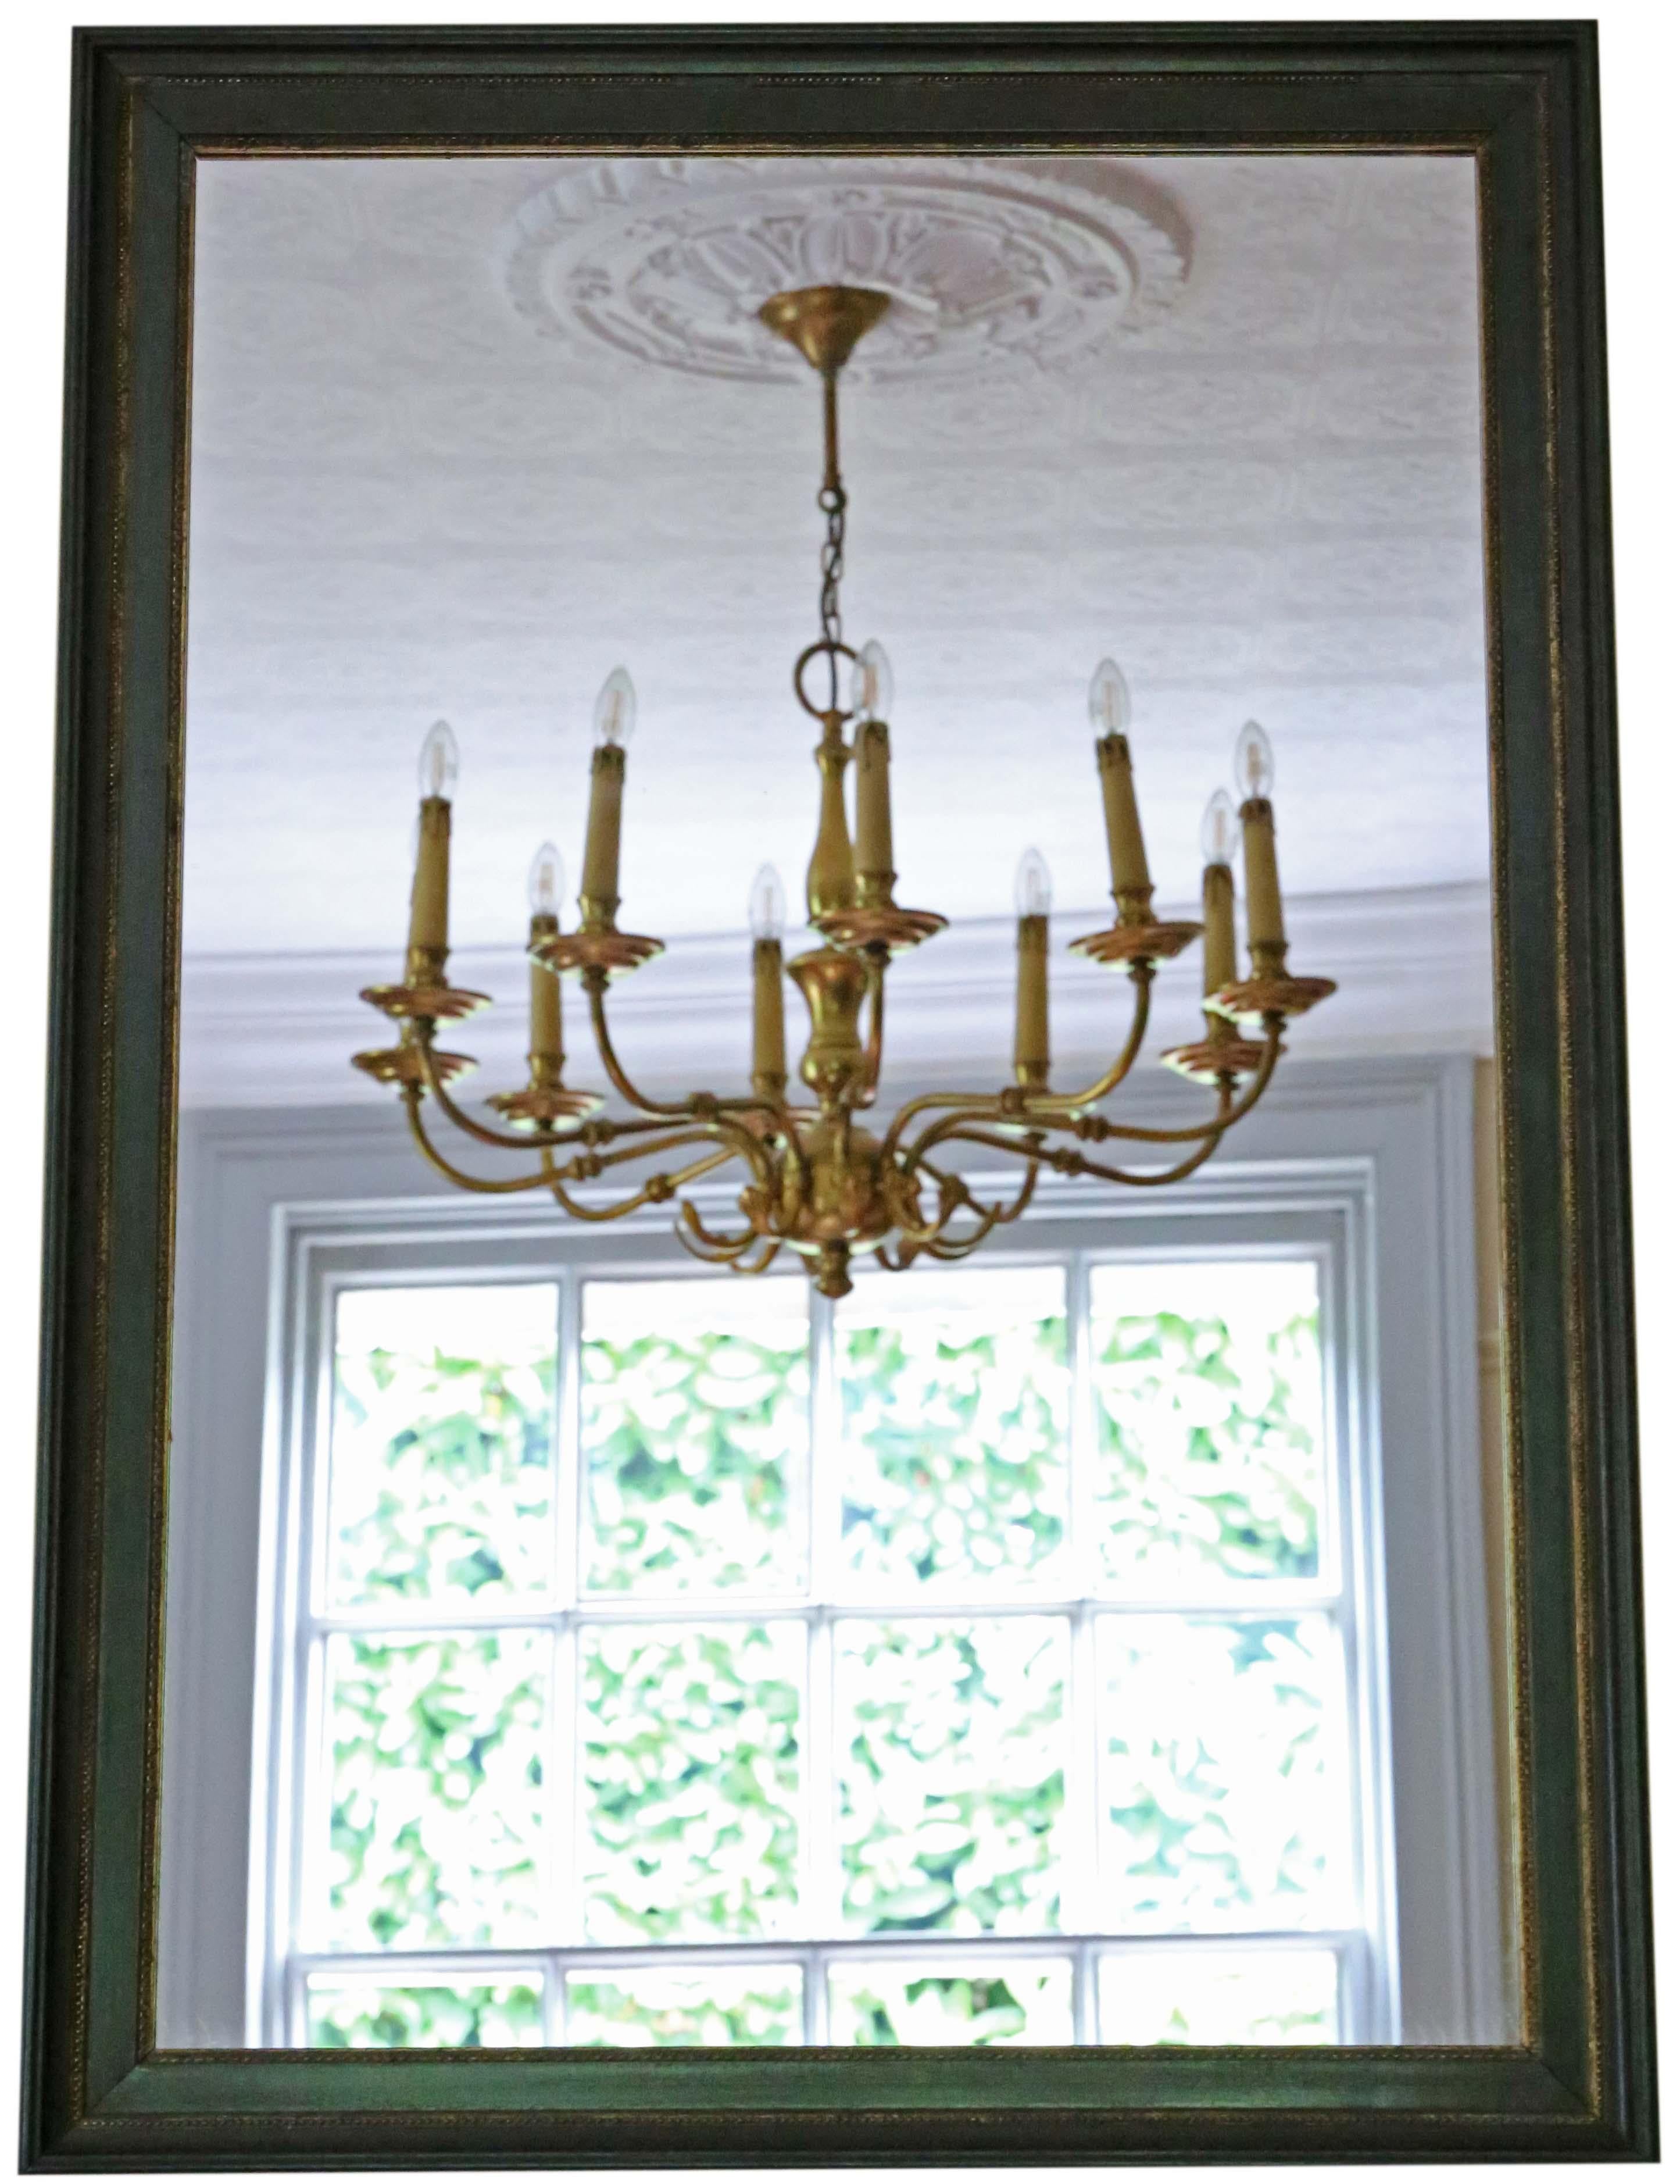 Antique quality large green and gilt C1910 overmantle or wall mirror with a lovely charm and elegance. At the time of listing, we have two of these and so could possibly supply a pair.

This is a lovely, rare mirror and a great decorative find.

An